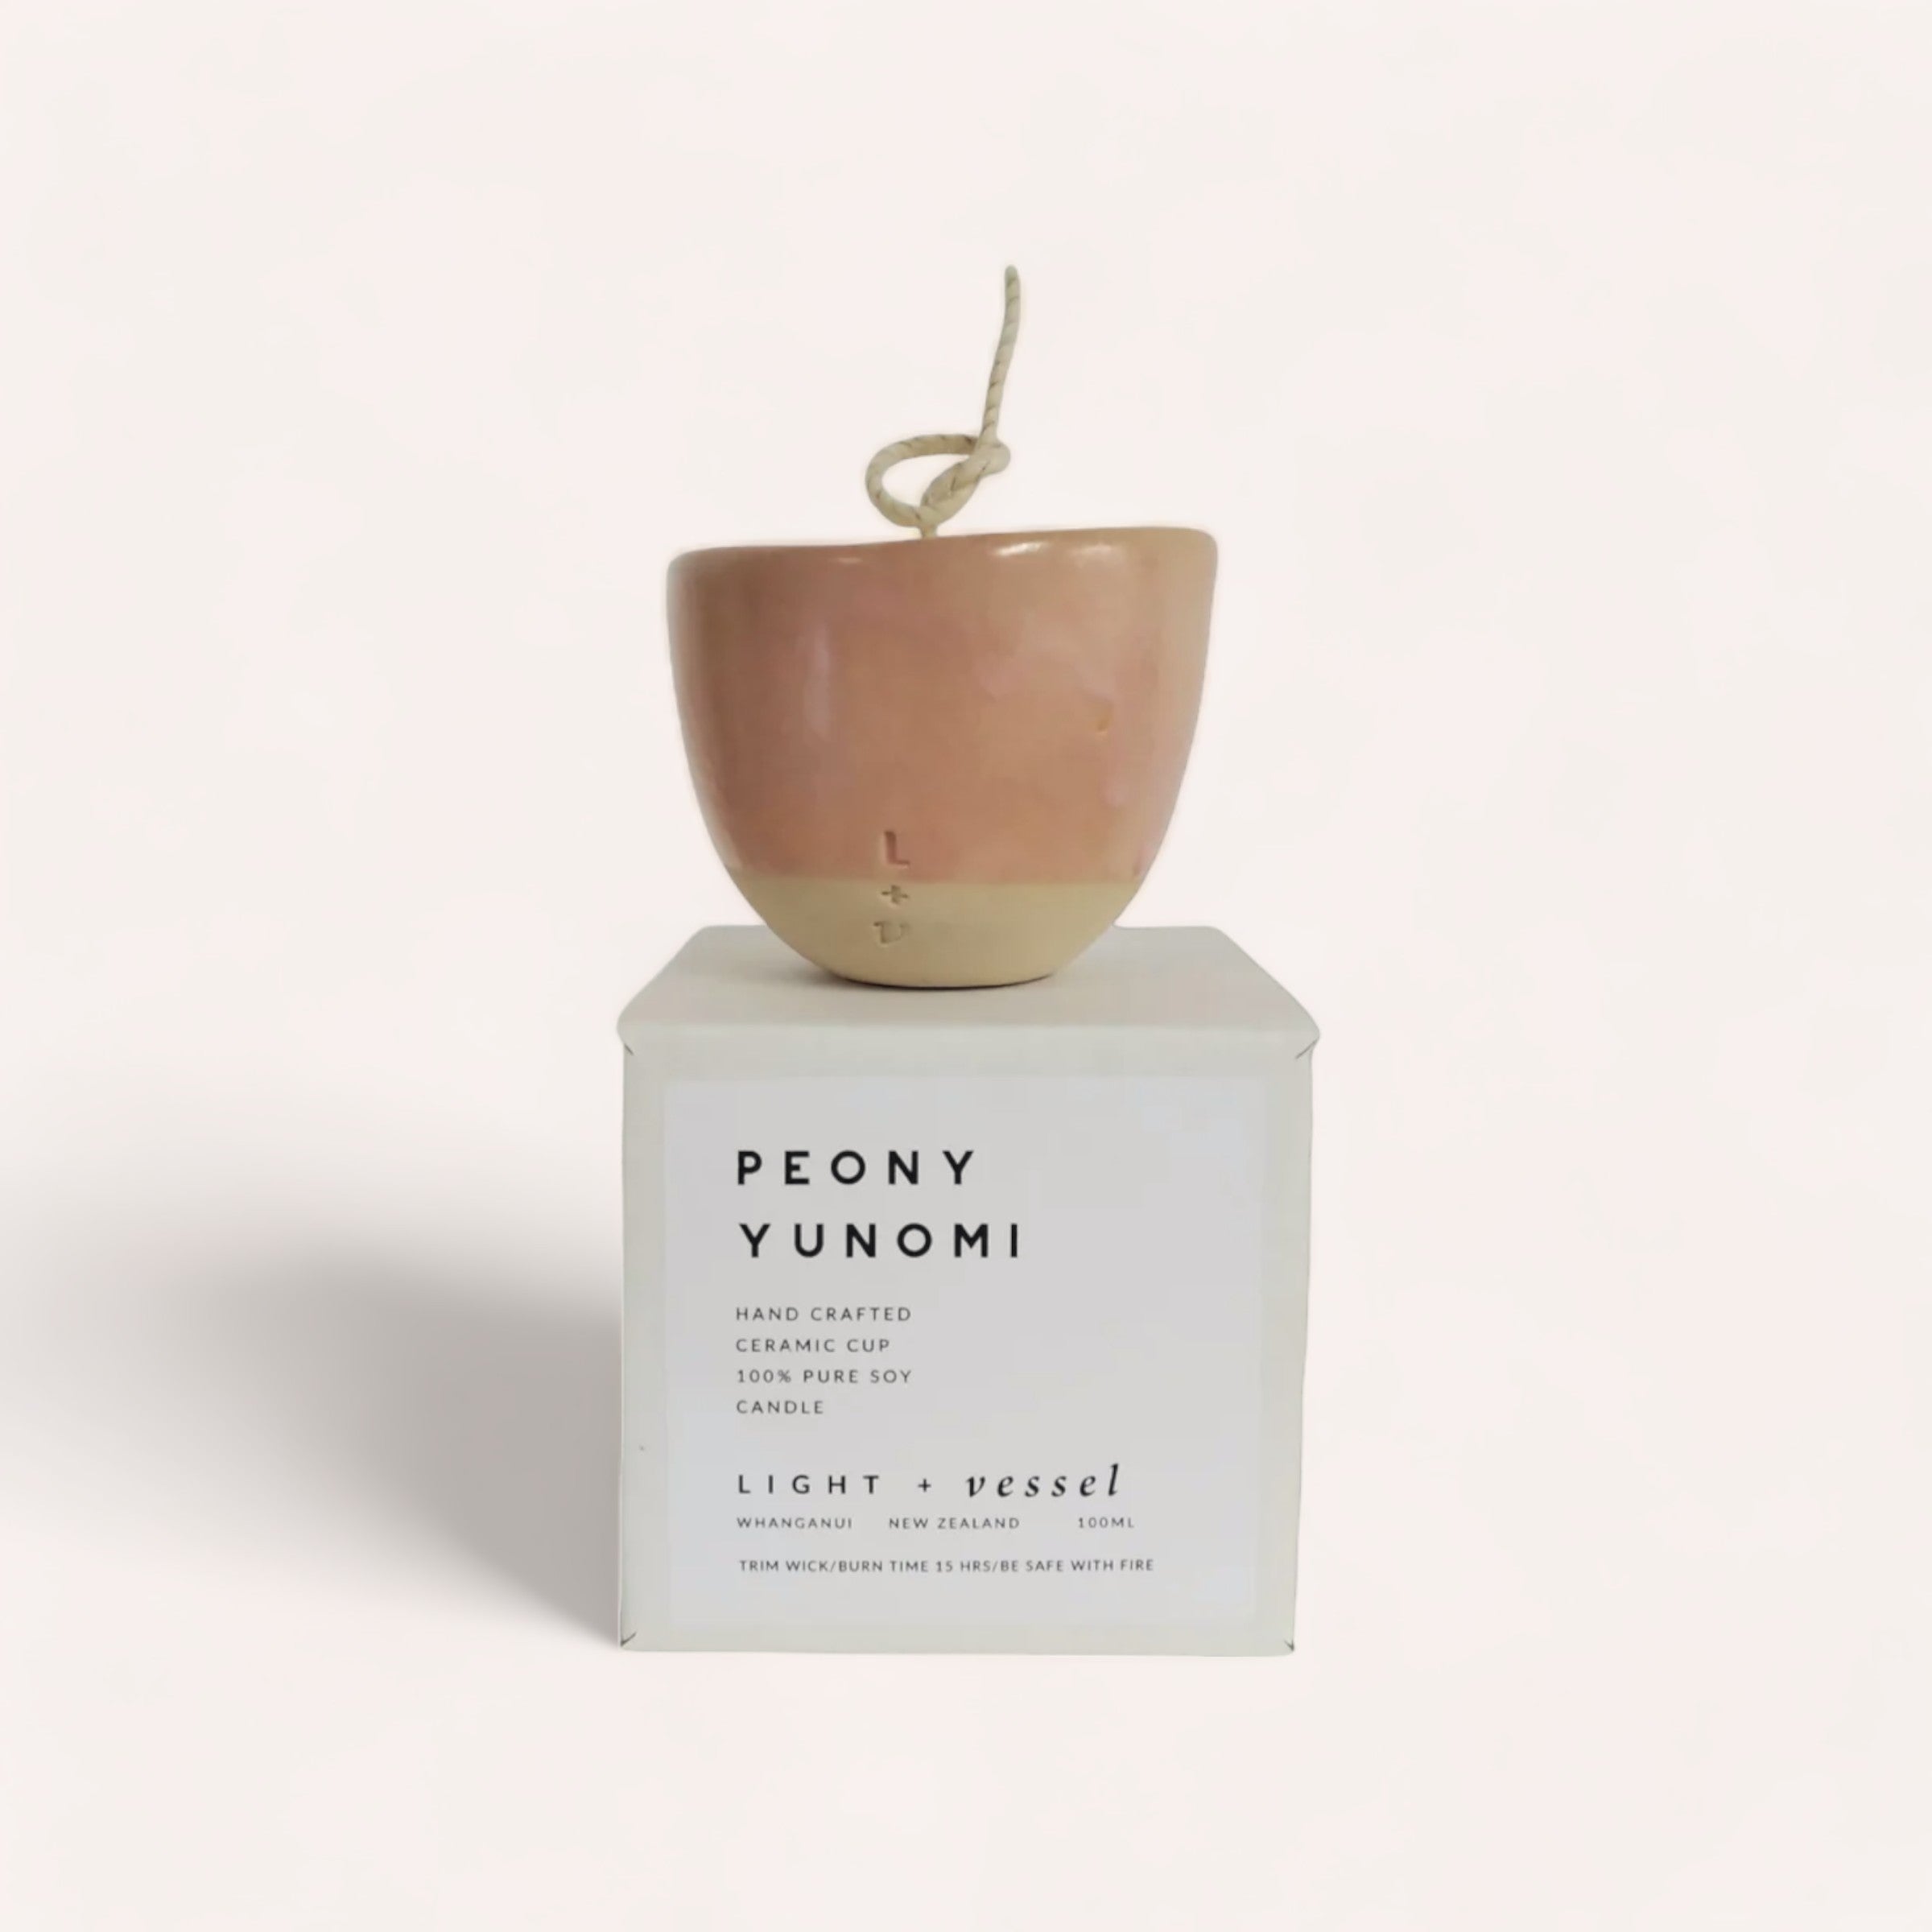 A ceramic Peony Candle by Light + Vessel with a wick, displayed on its packaging labeled "Peony Candle by Light + Vessel, handcrafted, coconut soy candle with natural fragrance oils, light + vessel".